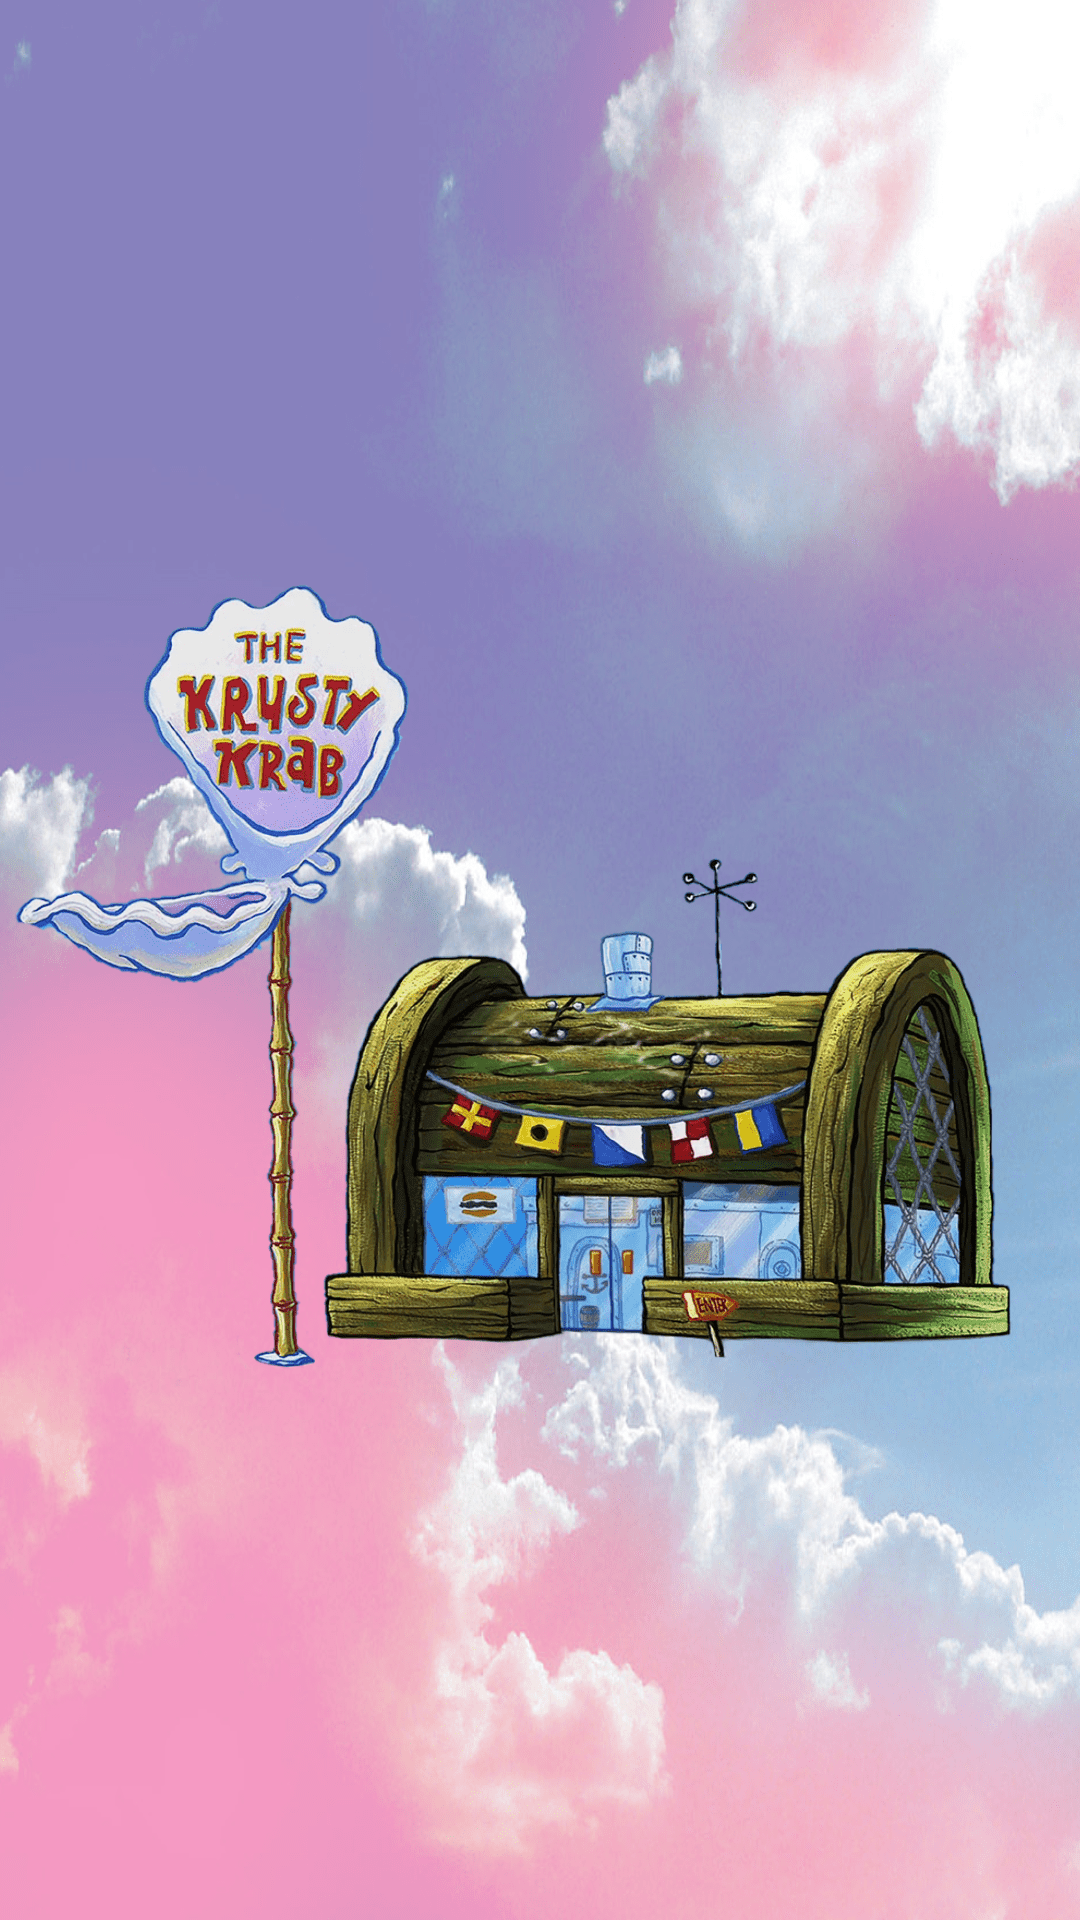 A cartoon building with clouds in the background - SpongeBob, lo fi